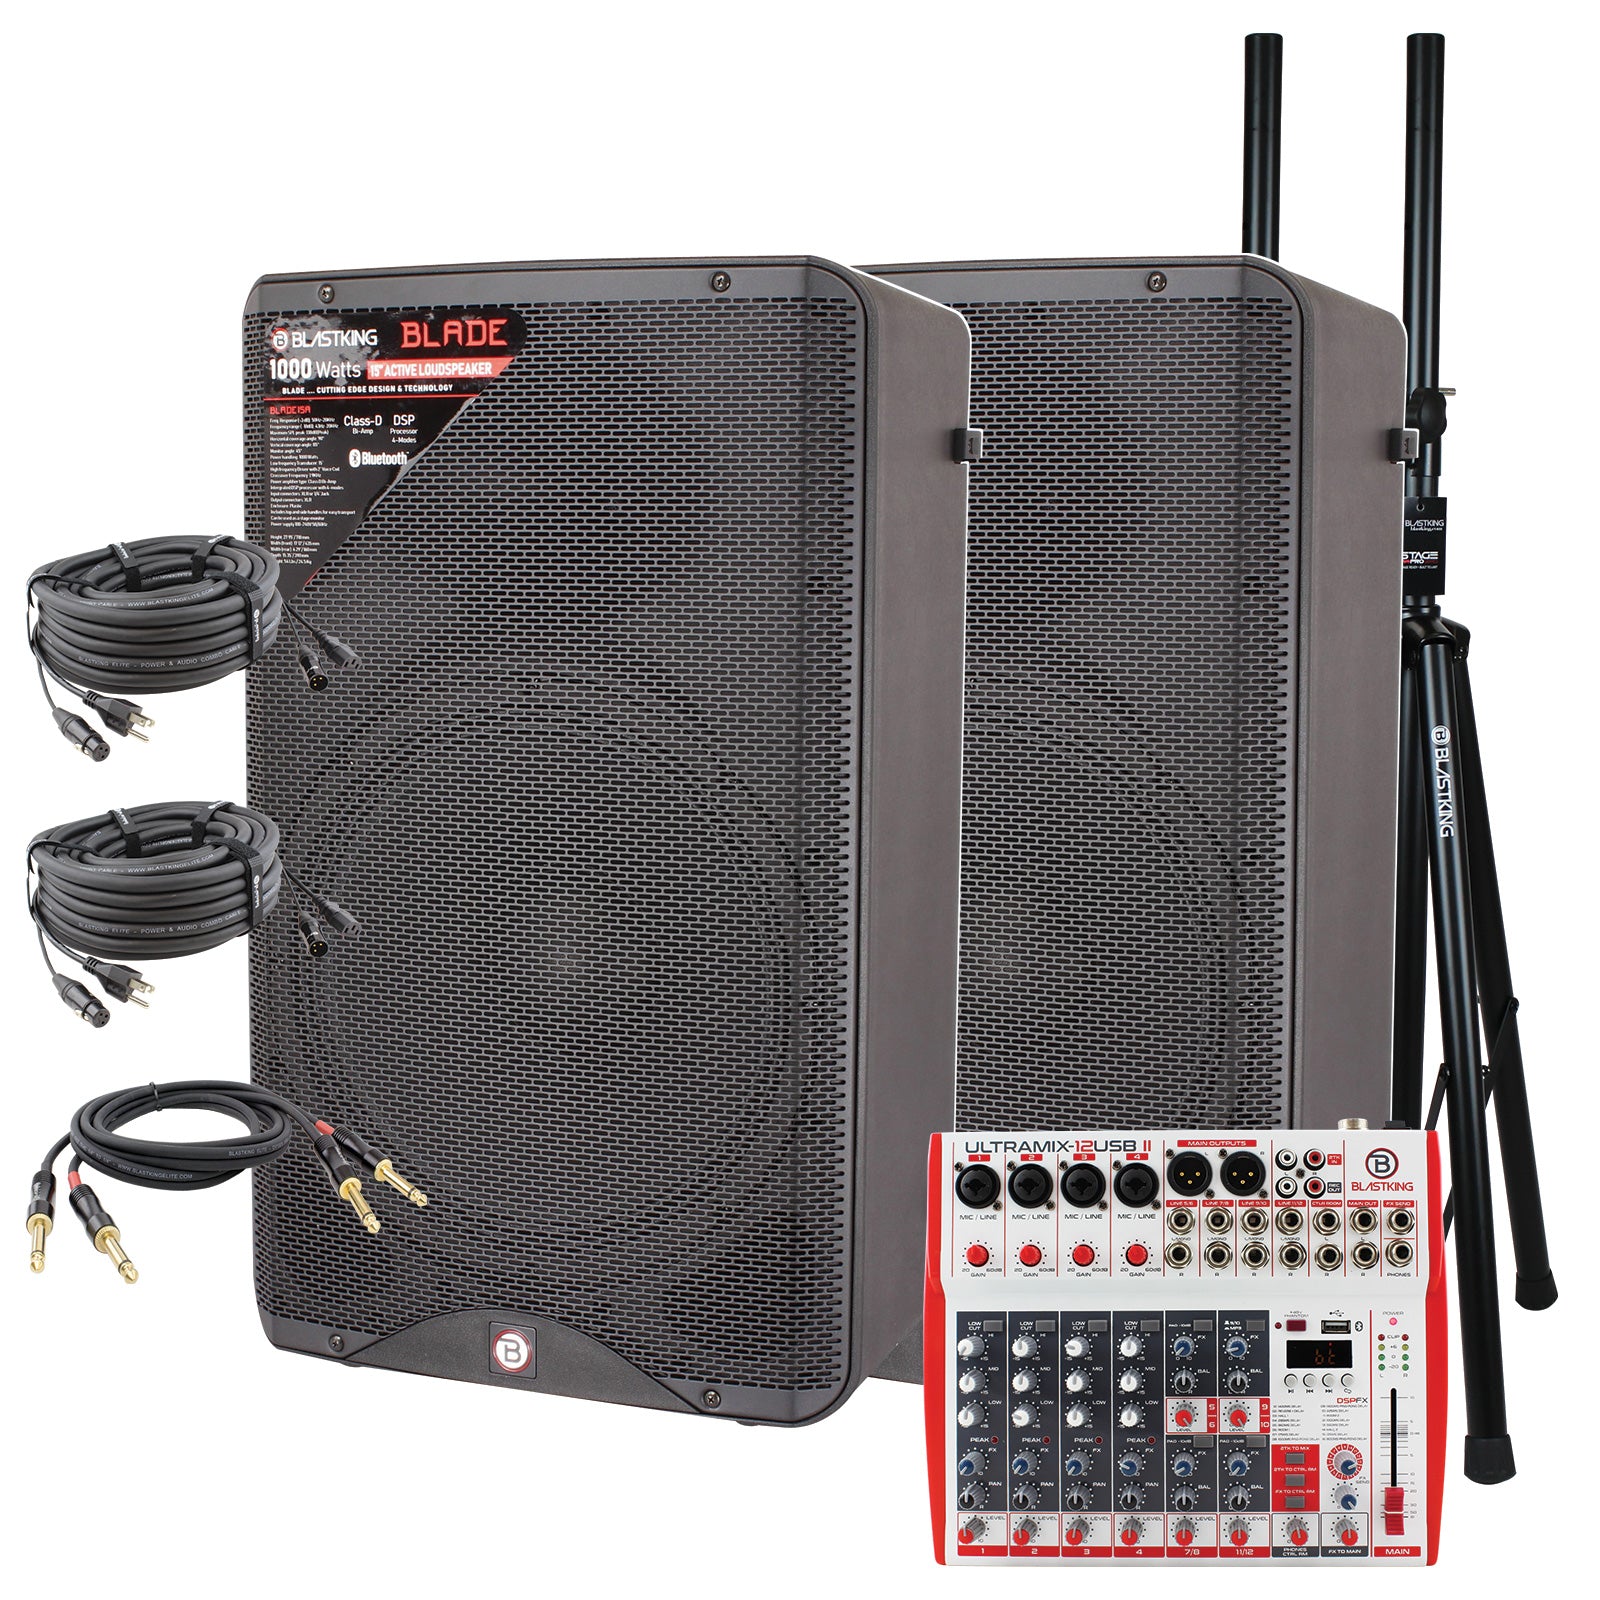 Blastking BLADE15A-PK1 (2) 15” BLADE15A Speaker 1000 Watts + 12 Channel Analog Mixing Console + Stands + Cables